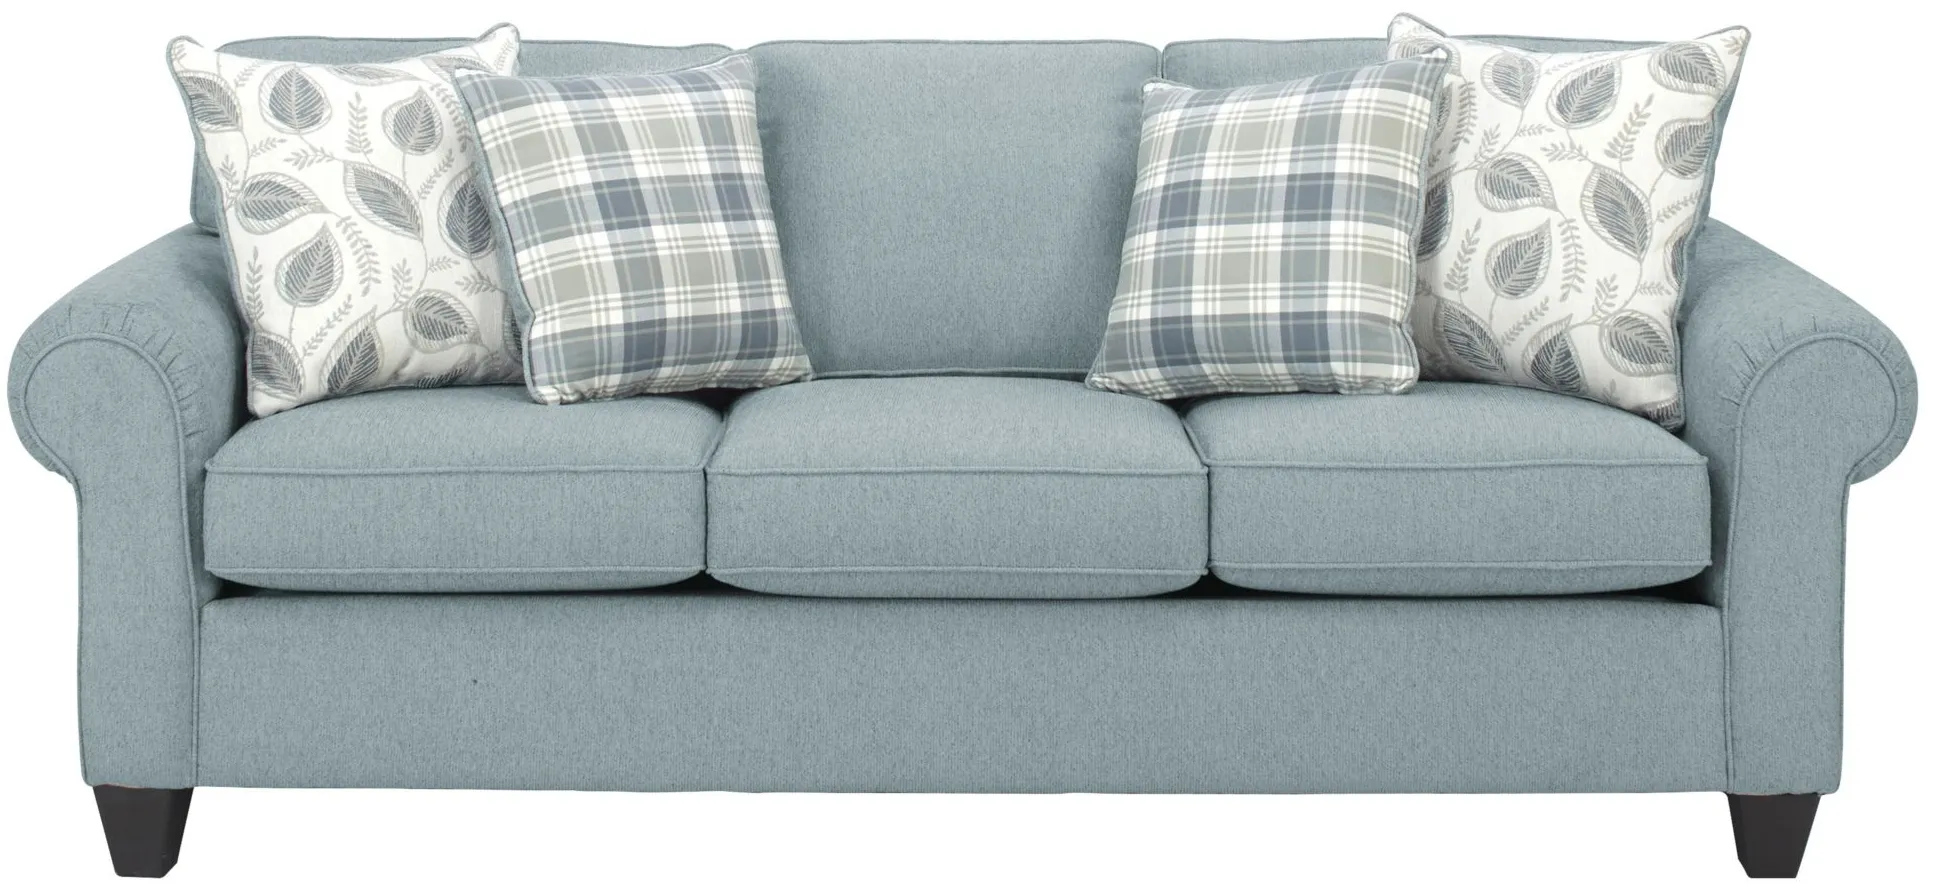 Saige 2-pc. Chenille Sofa and Loveseat Set in Marine by Flair